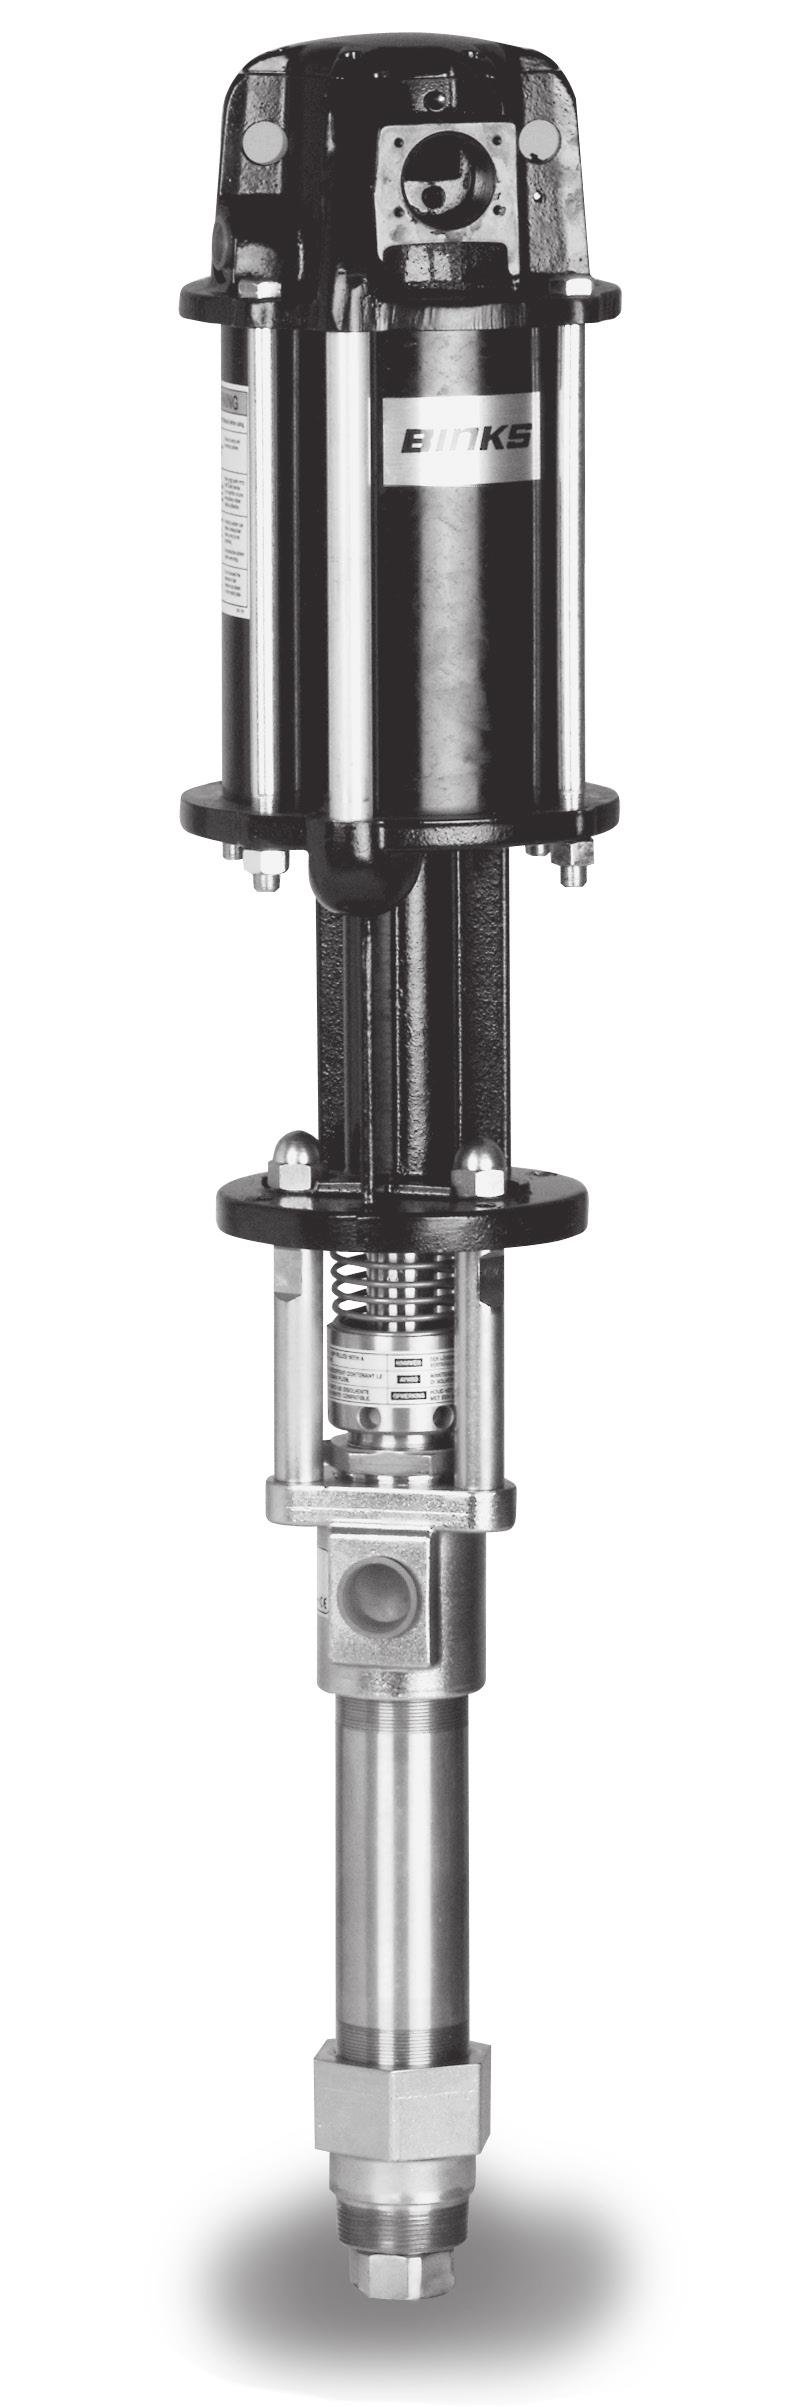 Infinity 60:1 Two-Ball Pump Pump #812365 Ratio 60:1 6000 PSI Performance 6000 PSI Part Numbers 1/2" NPT (F) Air Inlet 39-3/4" (1009 mm) 1-1/4" NPT (F) Muffler Exhaust 6" Motor 6" Stroke Air Inlet